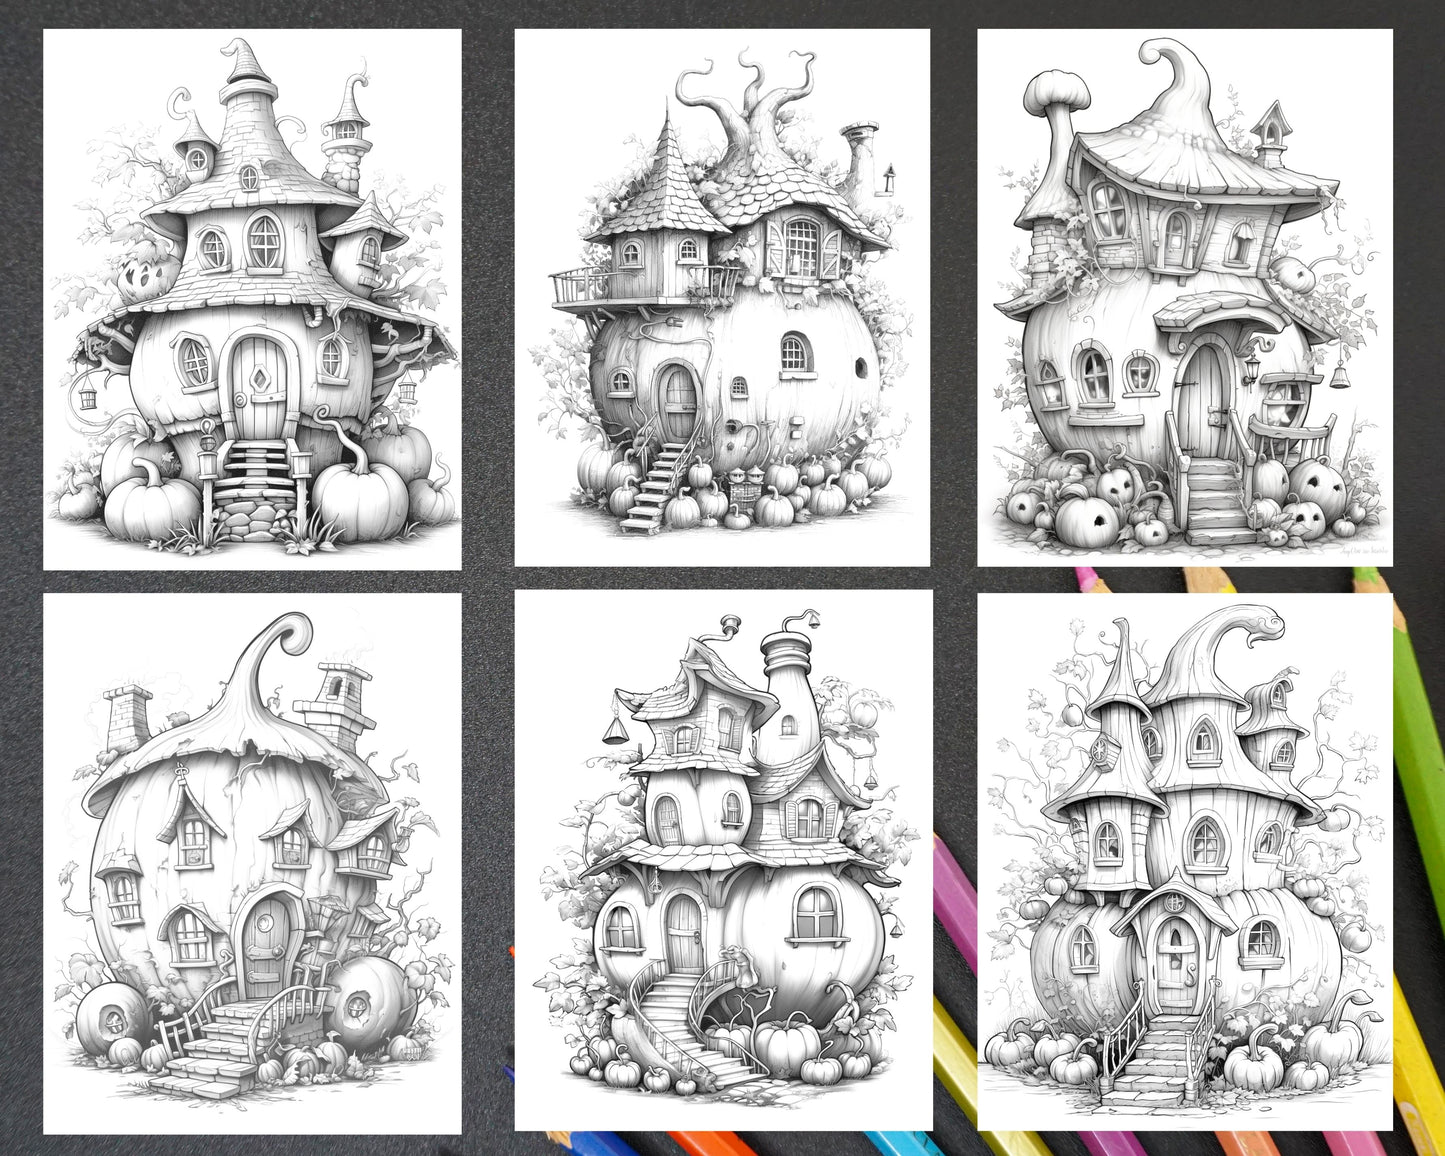 Pumpkin Fairy Houses Grayscale Coloring Pages Printable, Adult Coloring Book Autumn Theme, Halloween Coloring Sheets for Adults